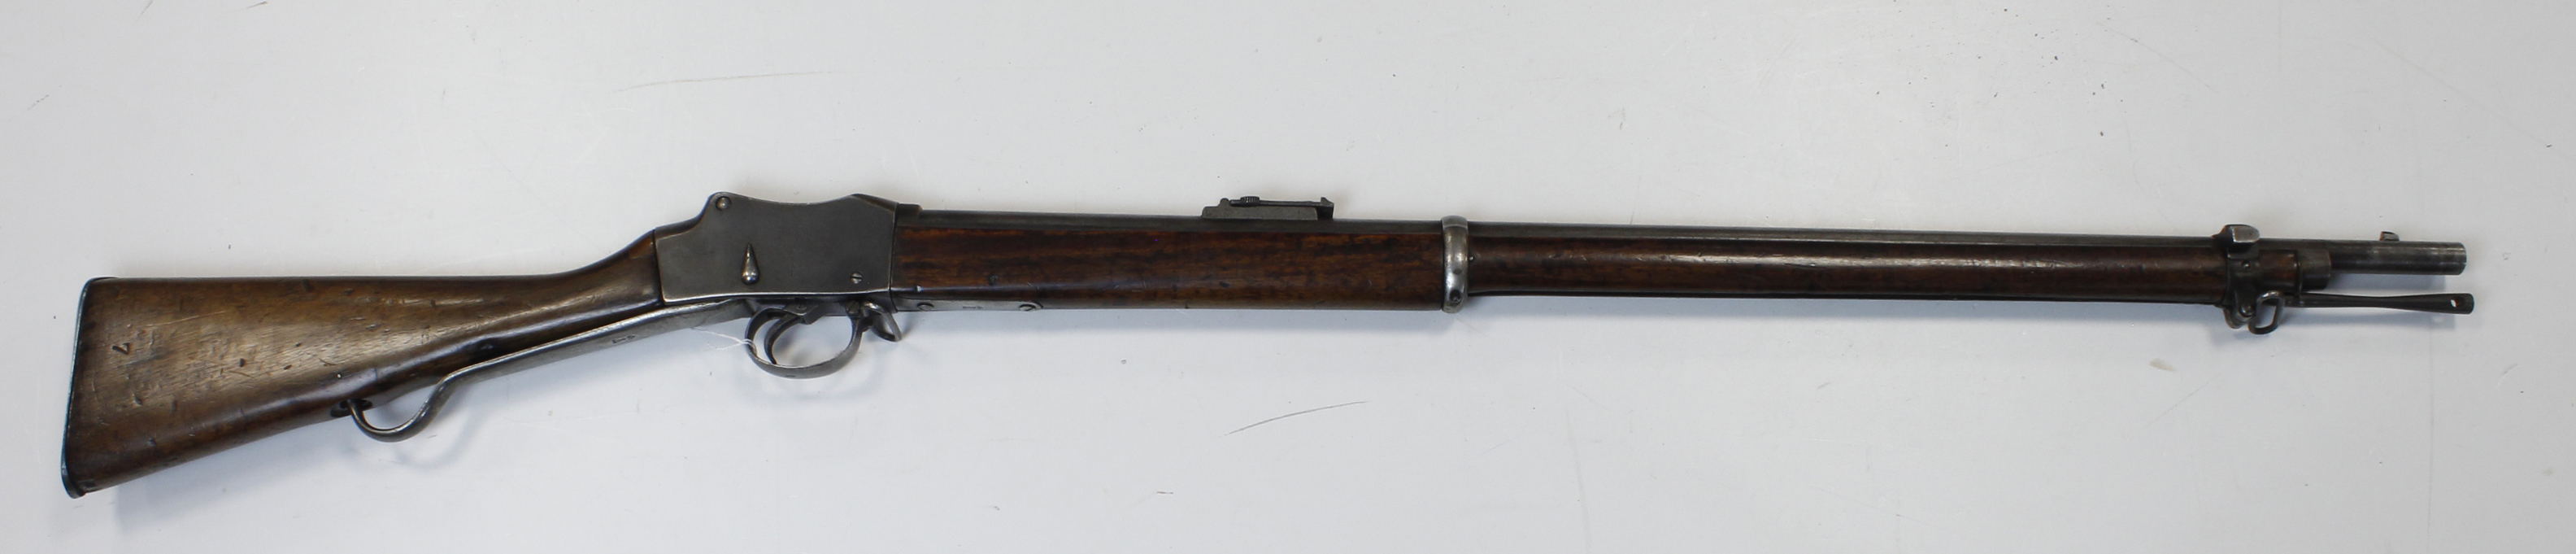 Martini Henry Rifle dated 1887, made by Enfield, barrel and receiver matching serial numbers '